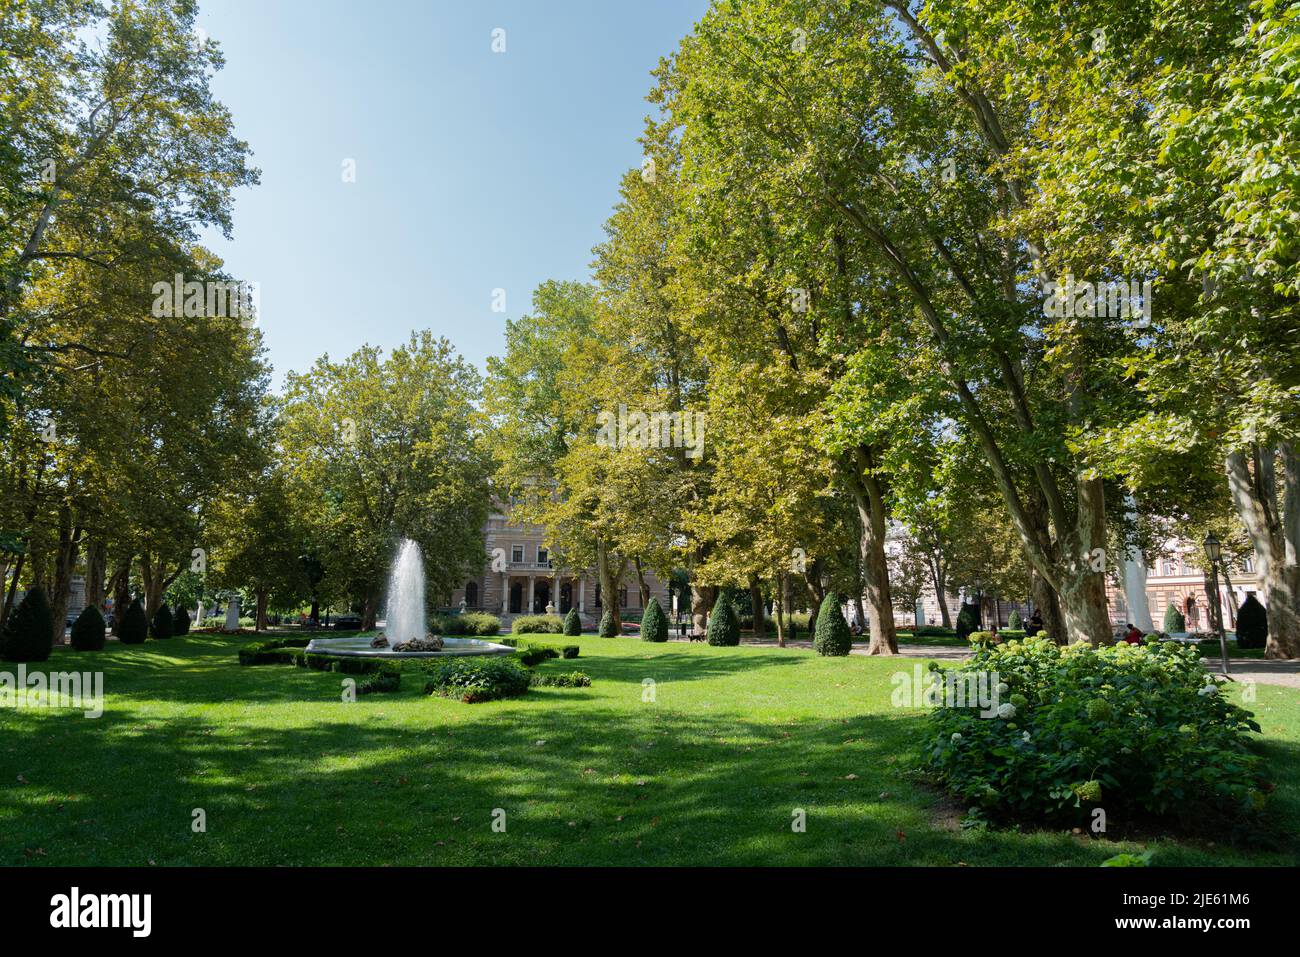 ZAGREB, CROATIA - JULY 29, 2021: People Relaxing On Summer Day In Zagreb Central Park Stock Photo